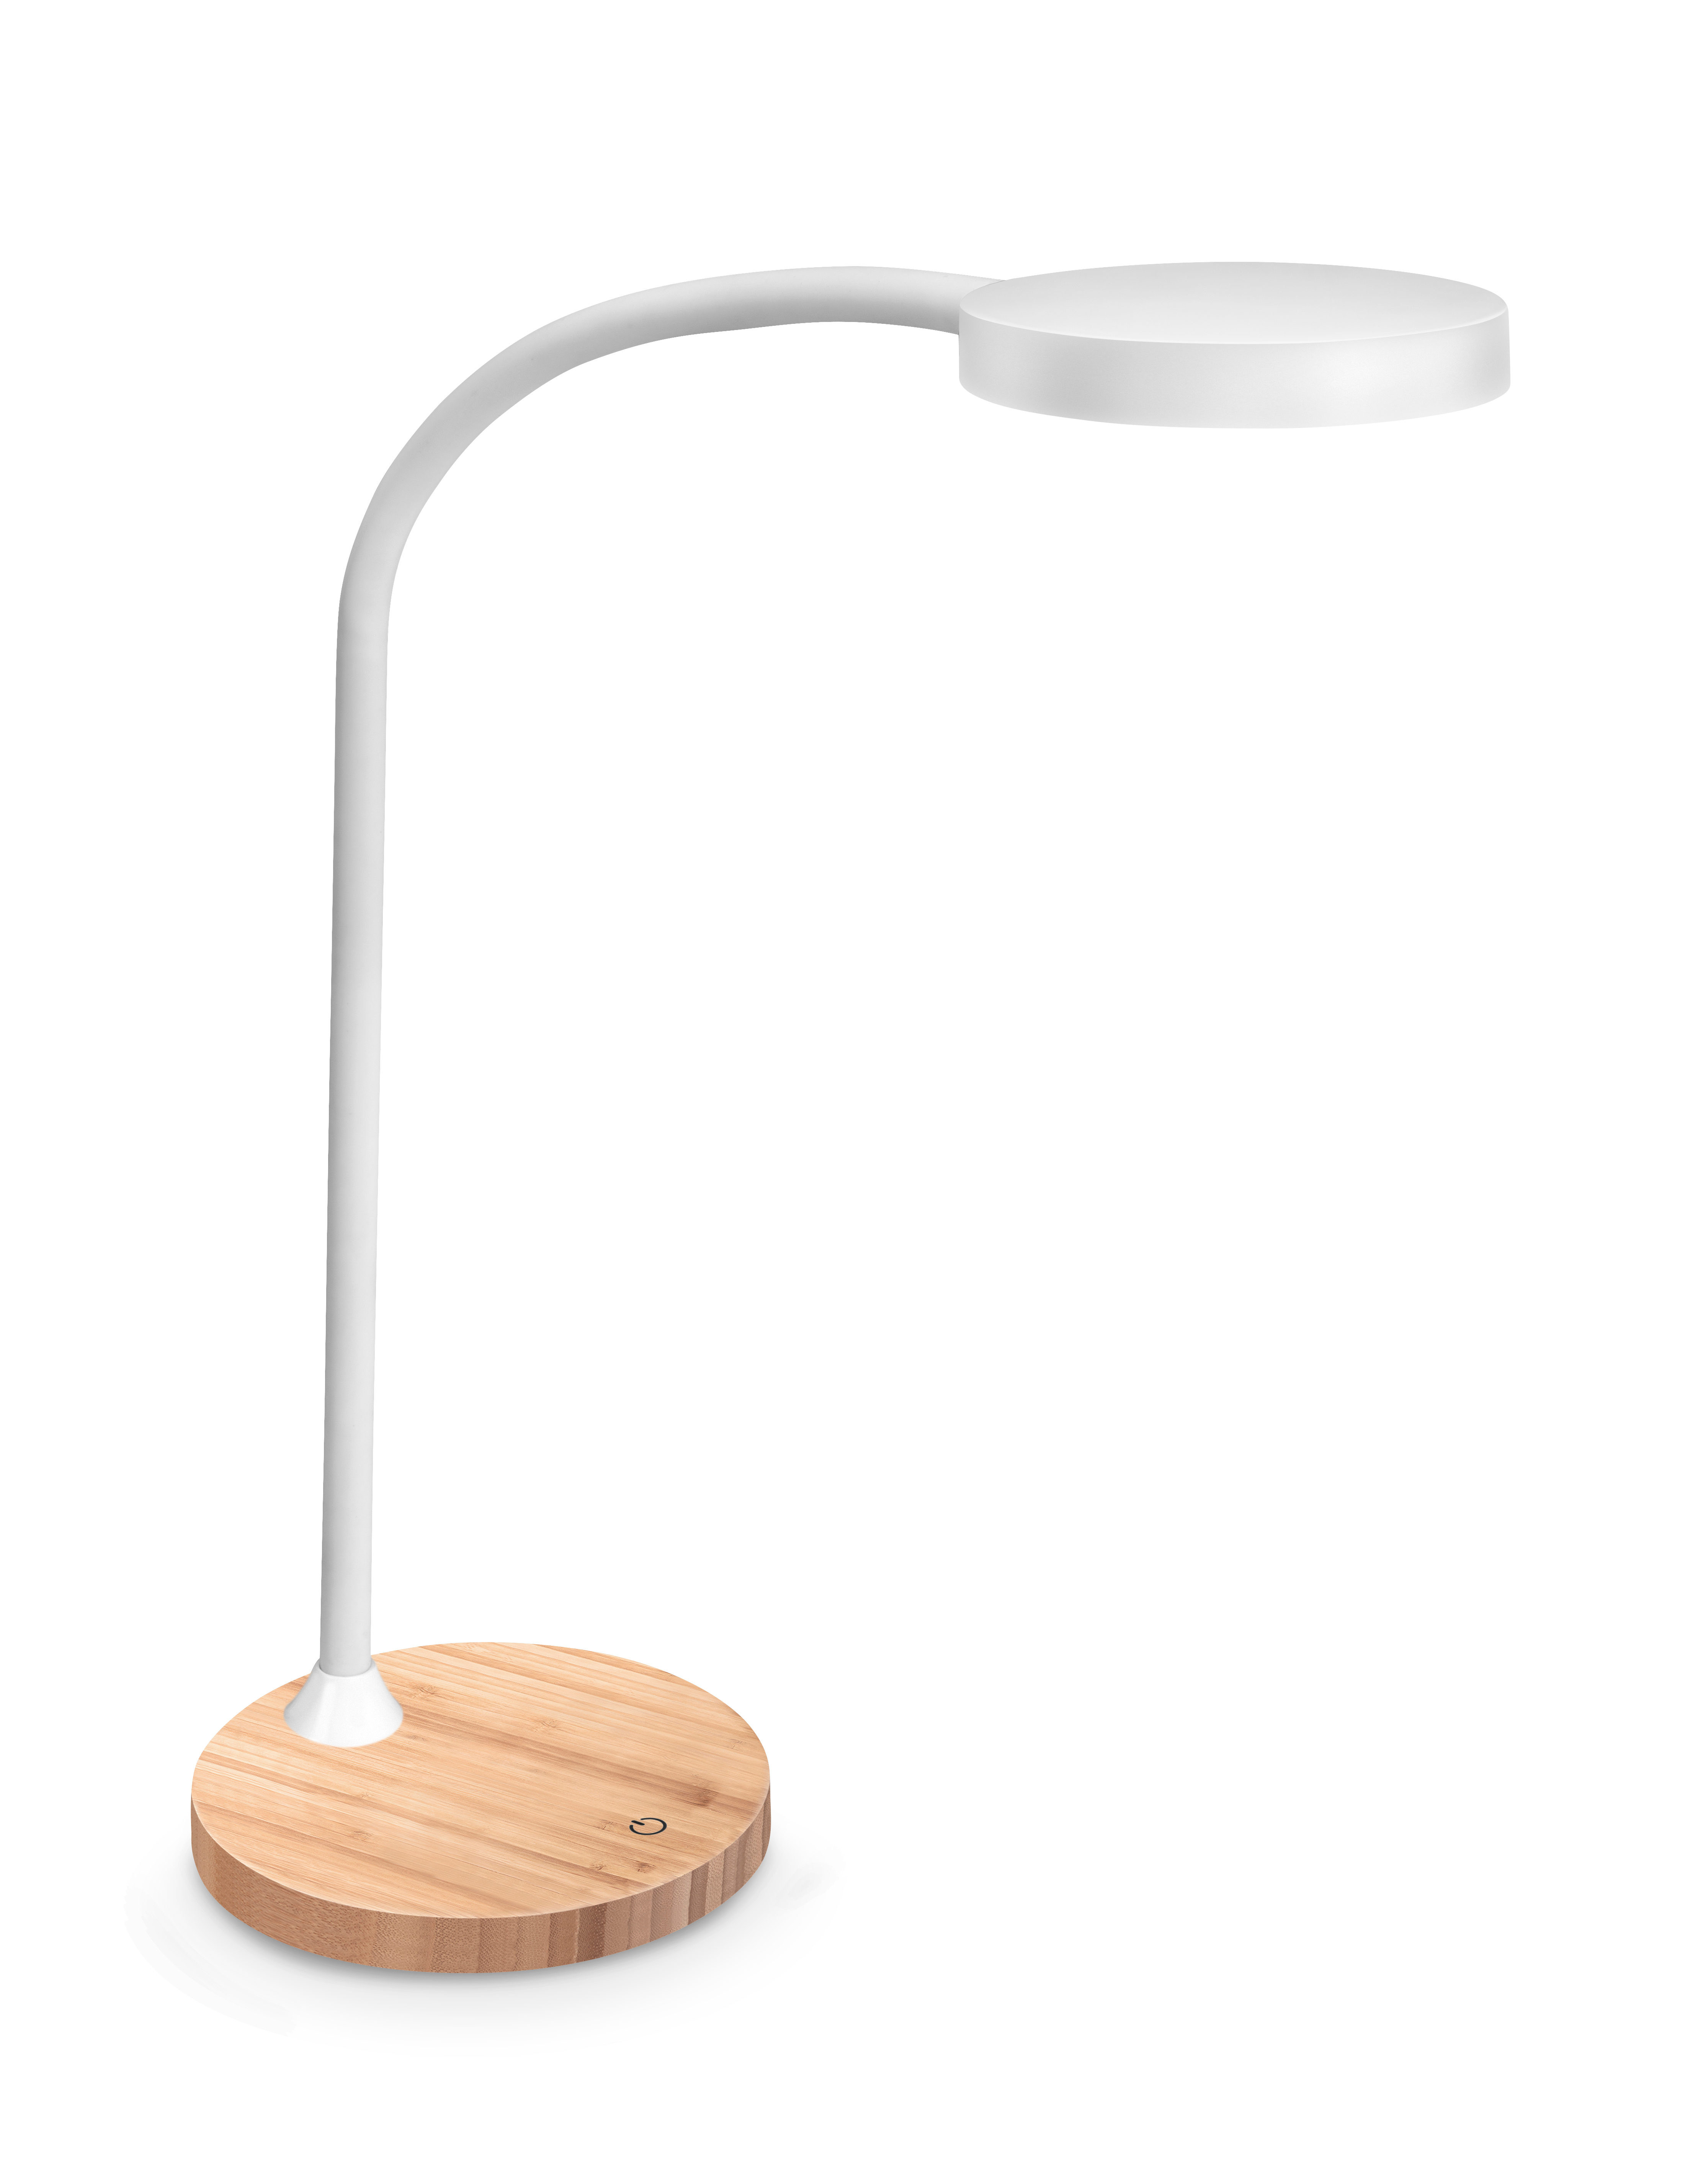 CEP Lampe de table FLEX CLED-0290Sil Chêne, dimmable 7W